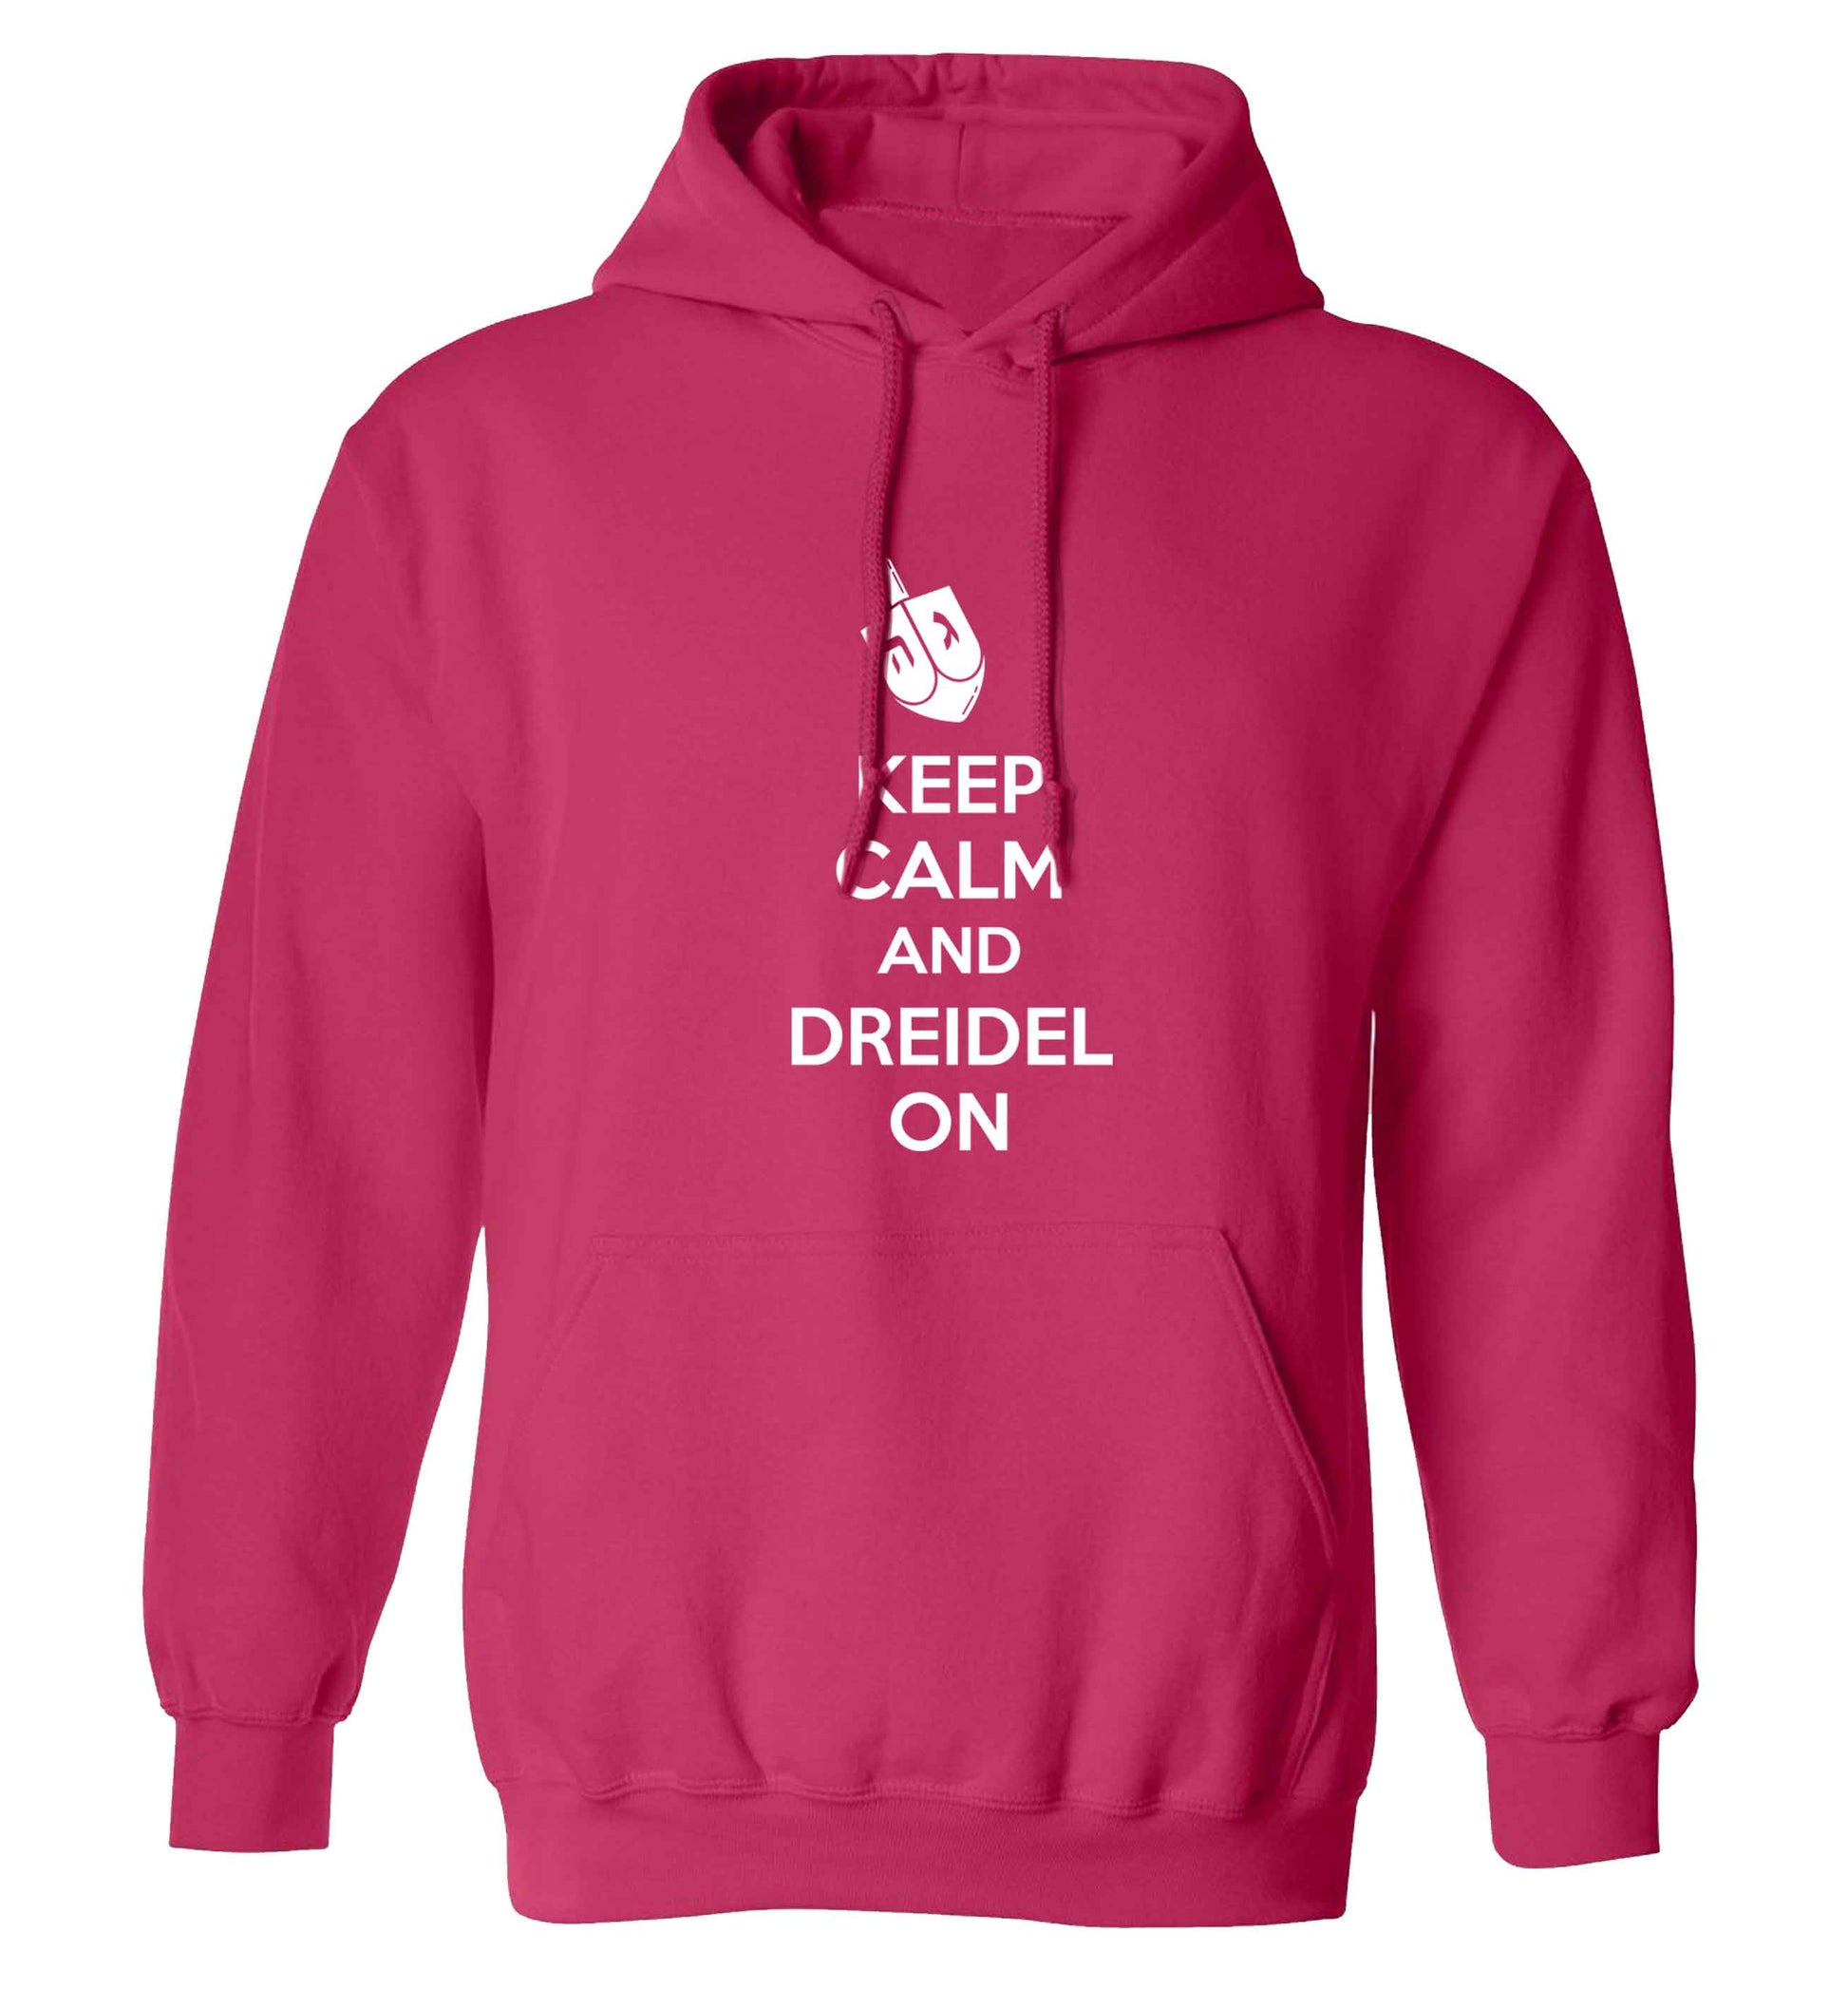 Keep calm and dreidel on adults unisex pink hoodie 2XL